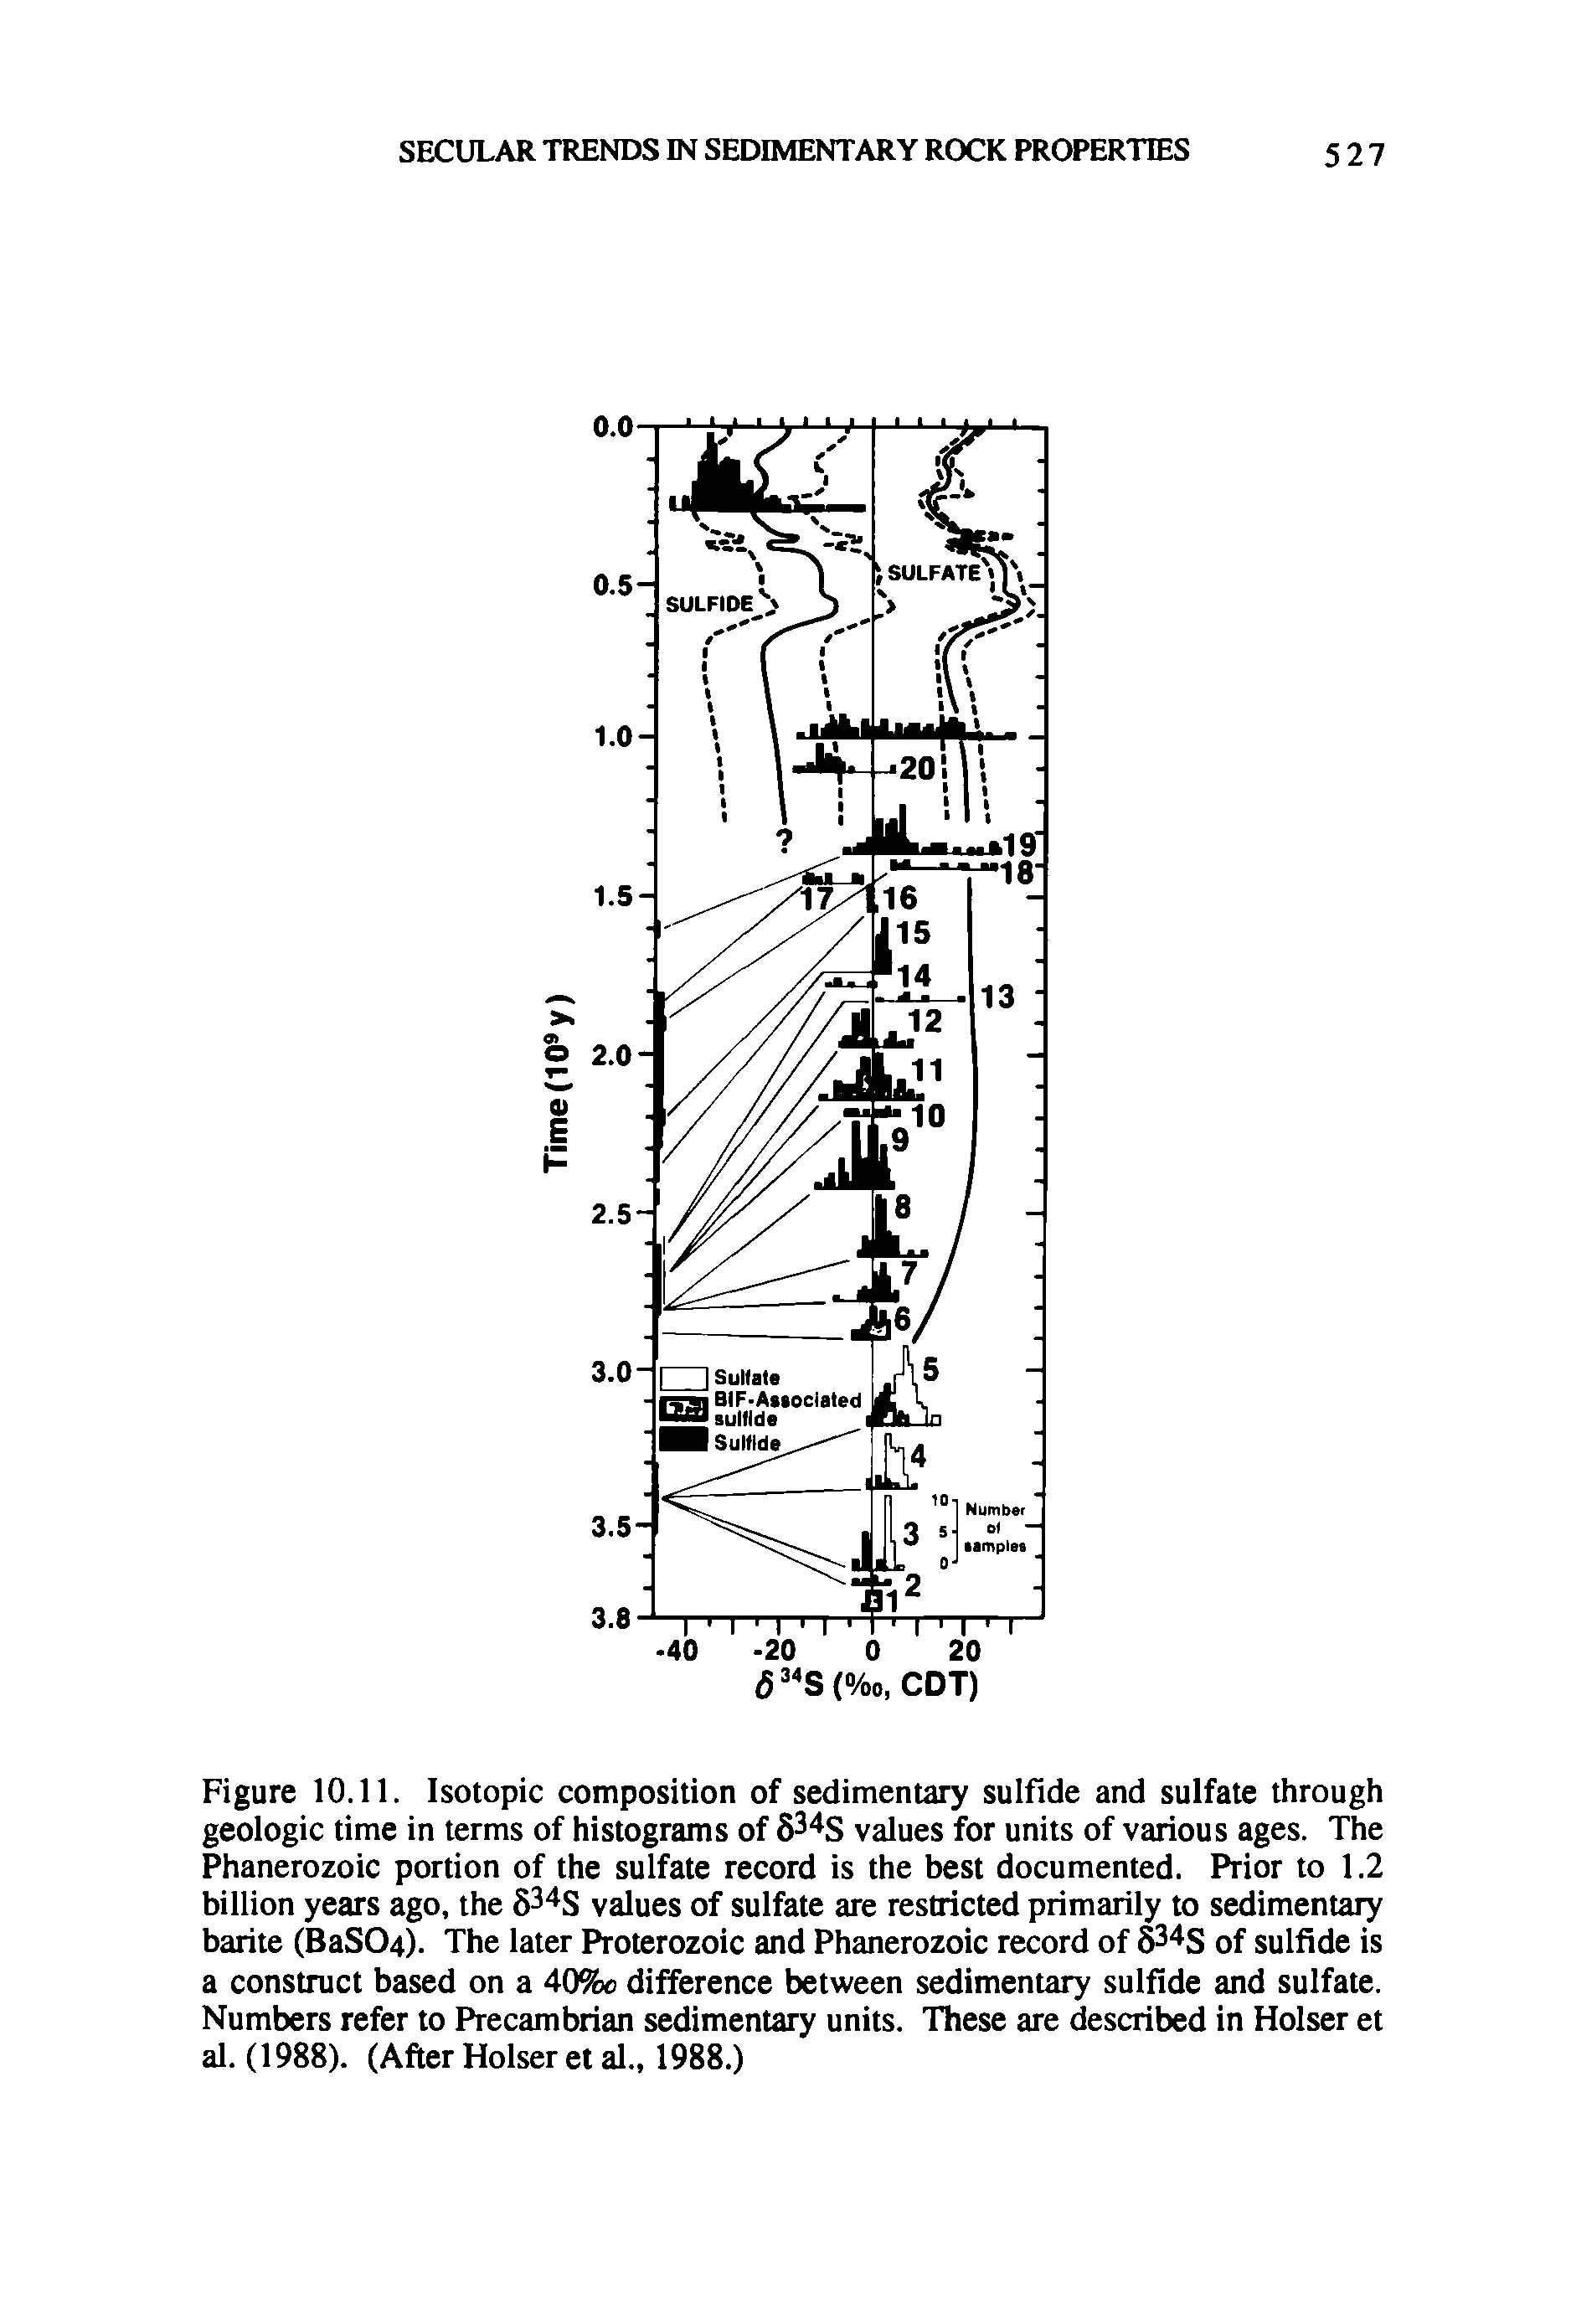 Figure 10.11. Isotopic composition of sedimentary sulfide and sulfate through geologic time in terms of histograms of 834S values for units of various ages. The Phanerozoic portion of the sulfate record is the best documented. Prior to 1.2 billion years ago, the 834S values of sulfate are restricted primarily to sedimentary barite (BaS04). The later Proterozoic and Phanerozoic record of 834S of sulfide is a construct based on a 40%c difference between sedimentary sulfide and sulfate. Numbers refer to Precambrian sedimentary units. These are described in Holser et al. (1988). (After Holser etal., 1988.)...